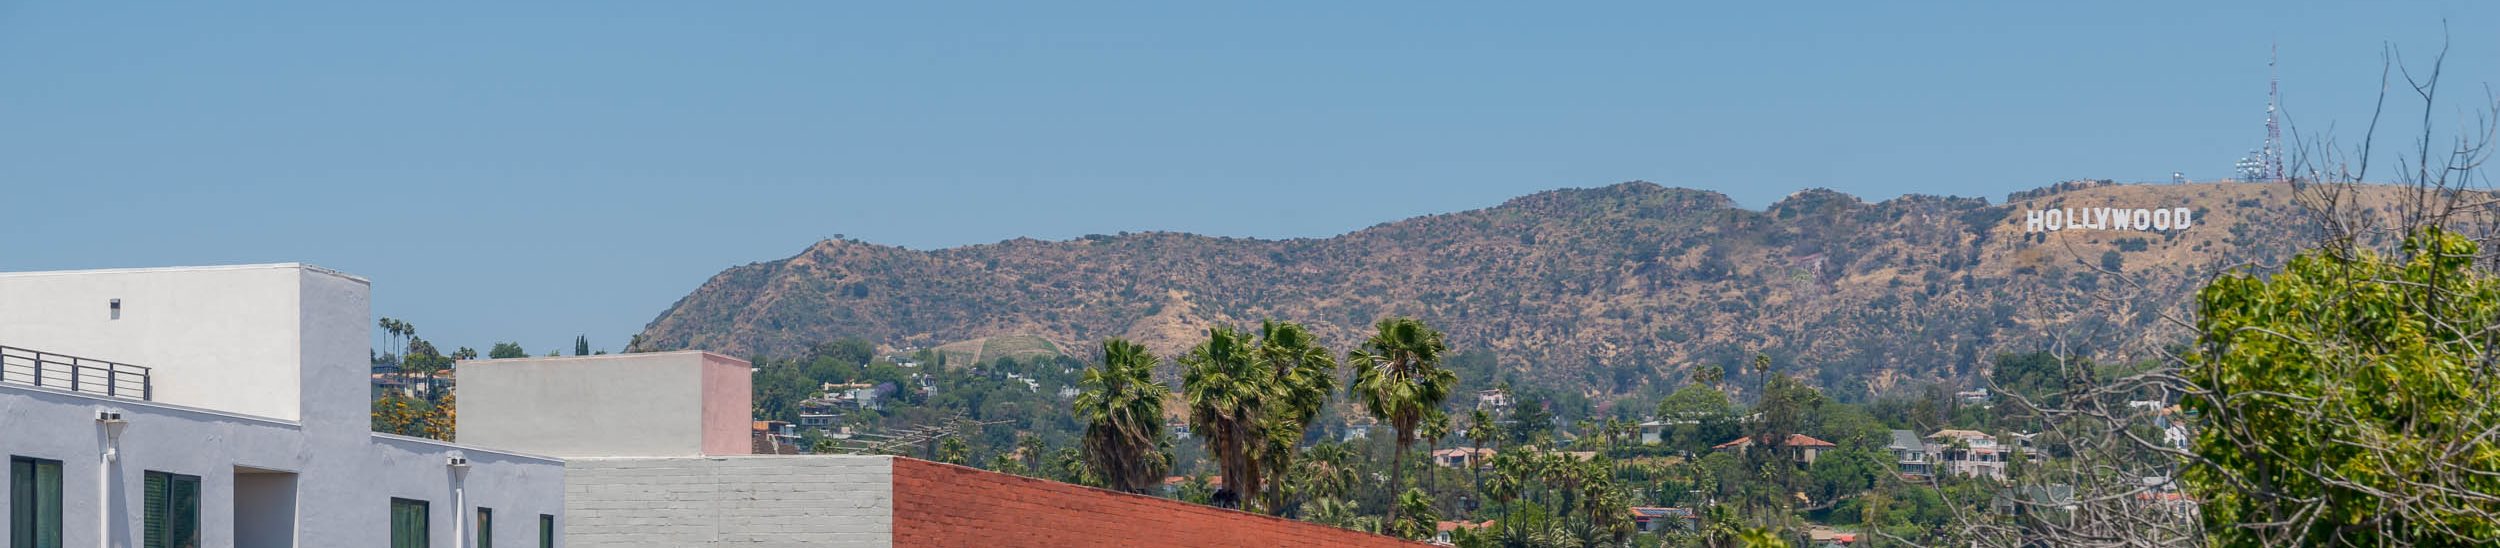 Building view of Hollywood Hills